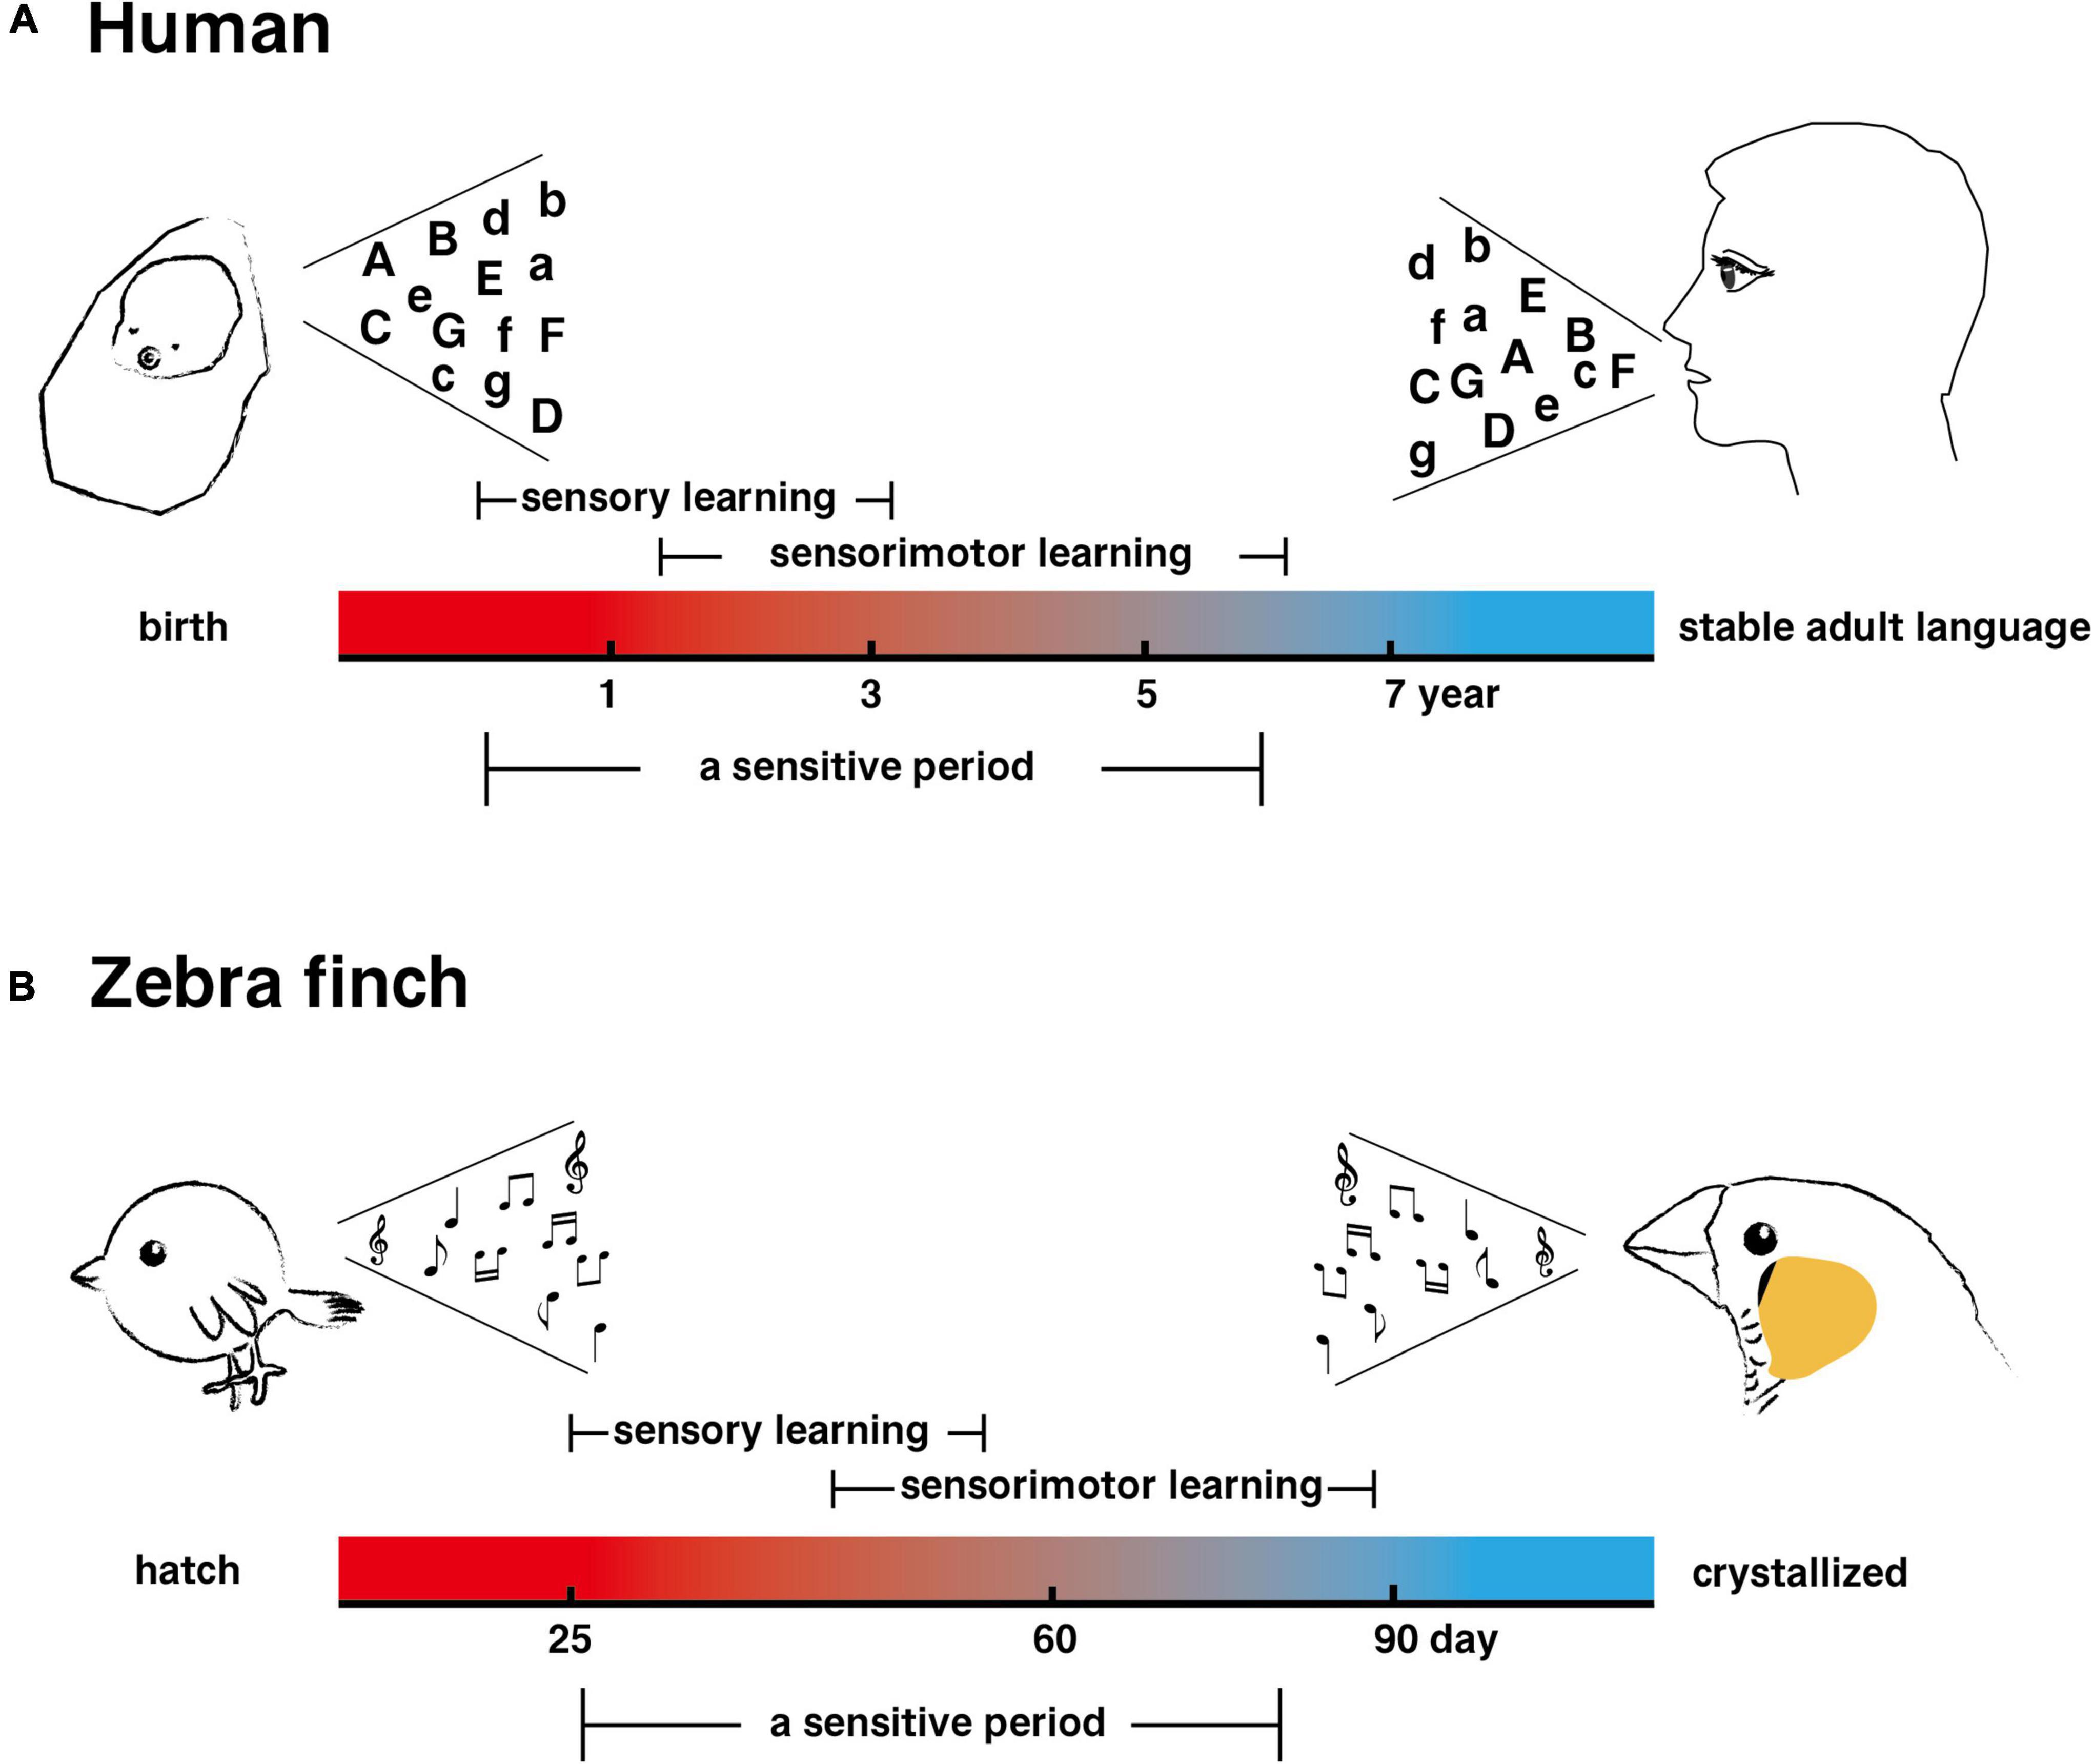 Analogies of human speech and bird song: From vocal learning behavior to its neural basis